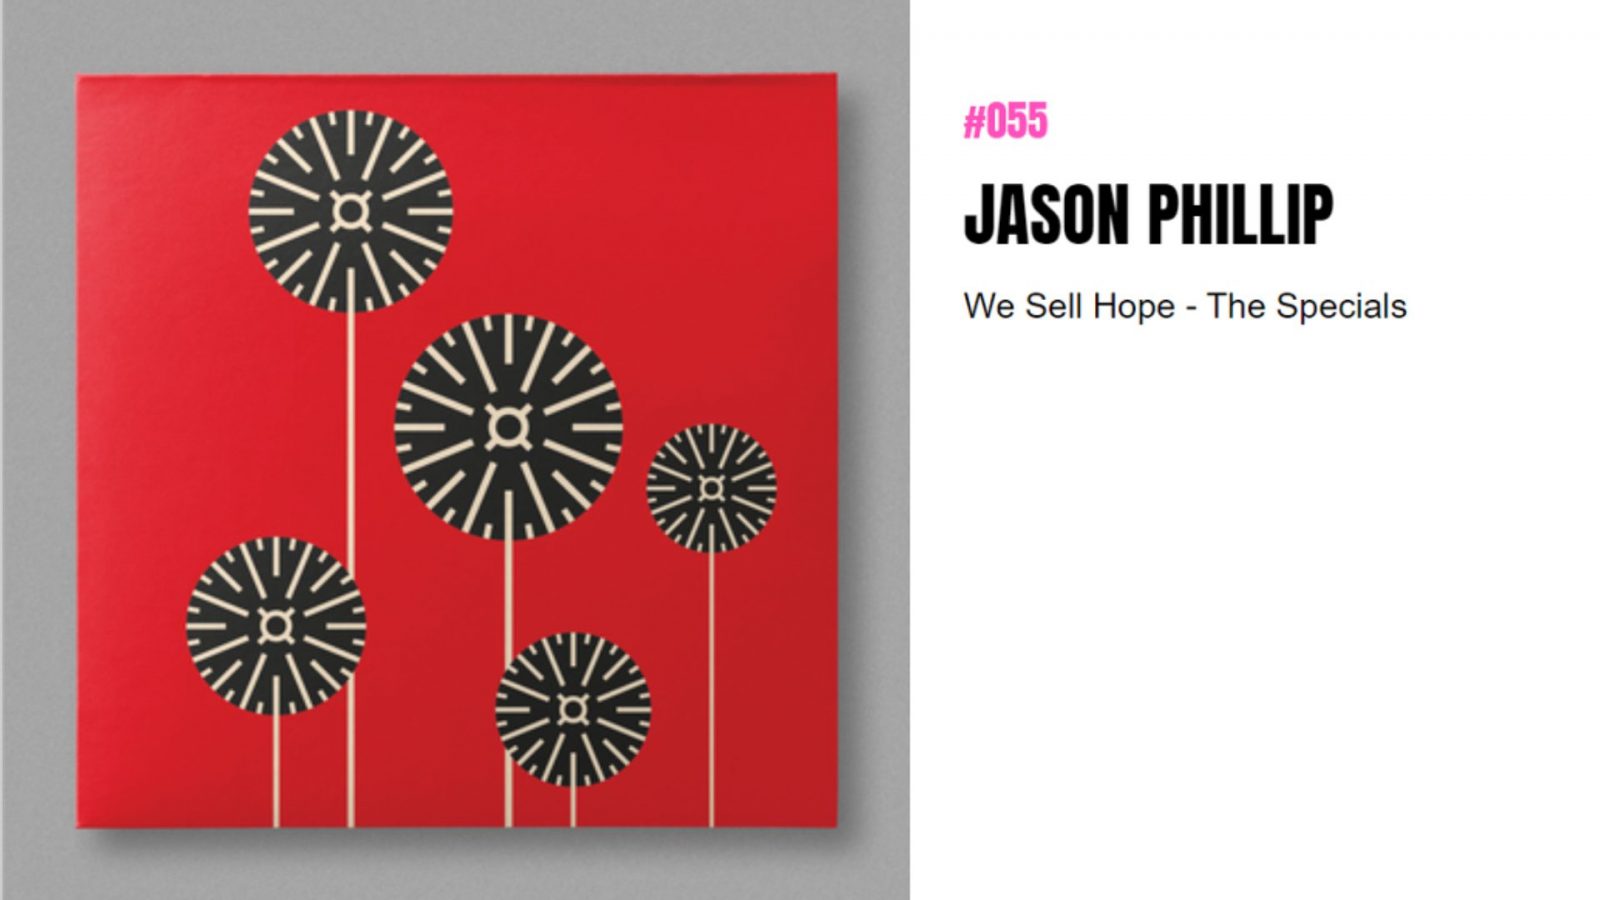 Jason Philip We Sell Hope - The Specials